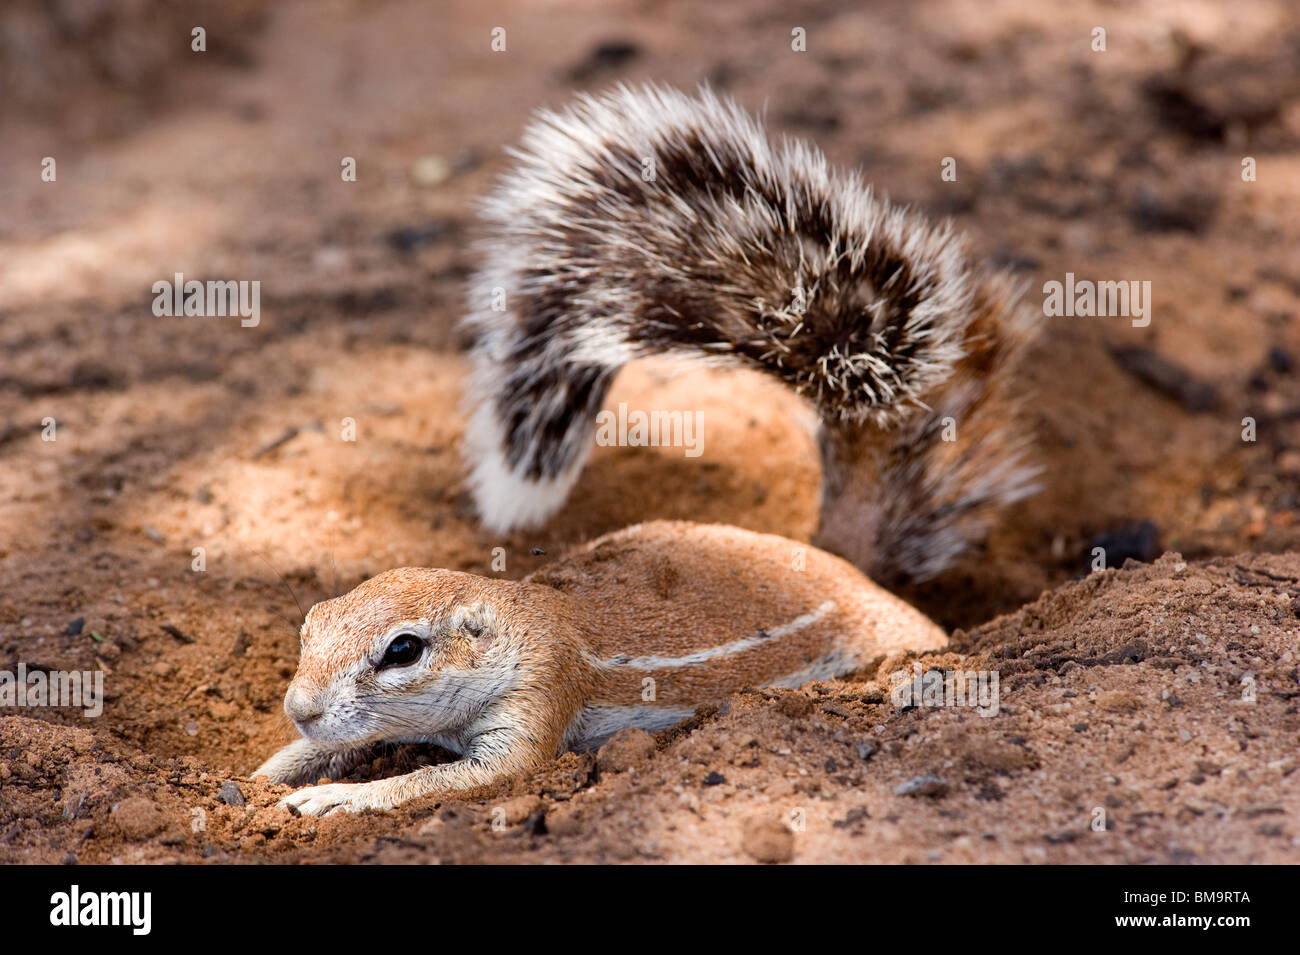 African Ground Squirrel burrowing Stock Photo